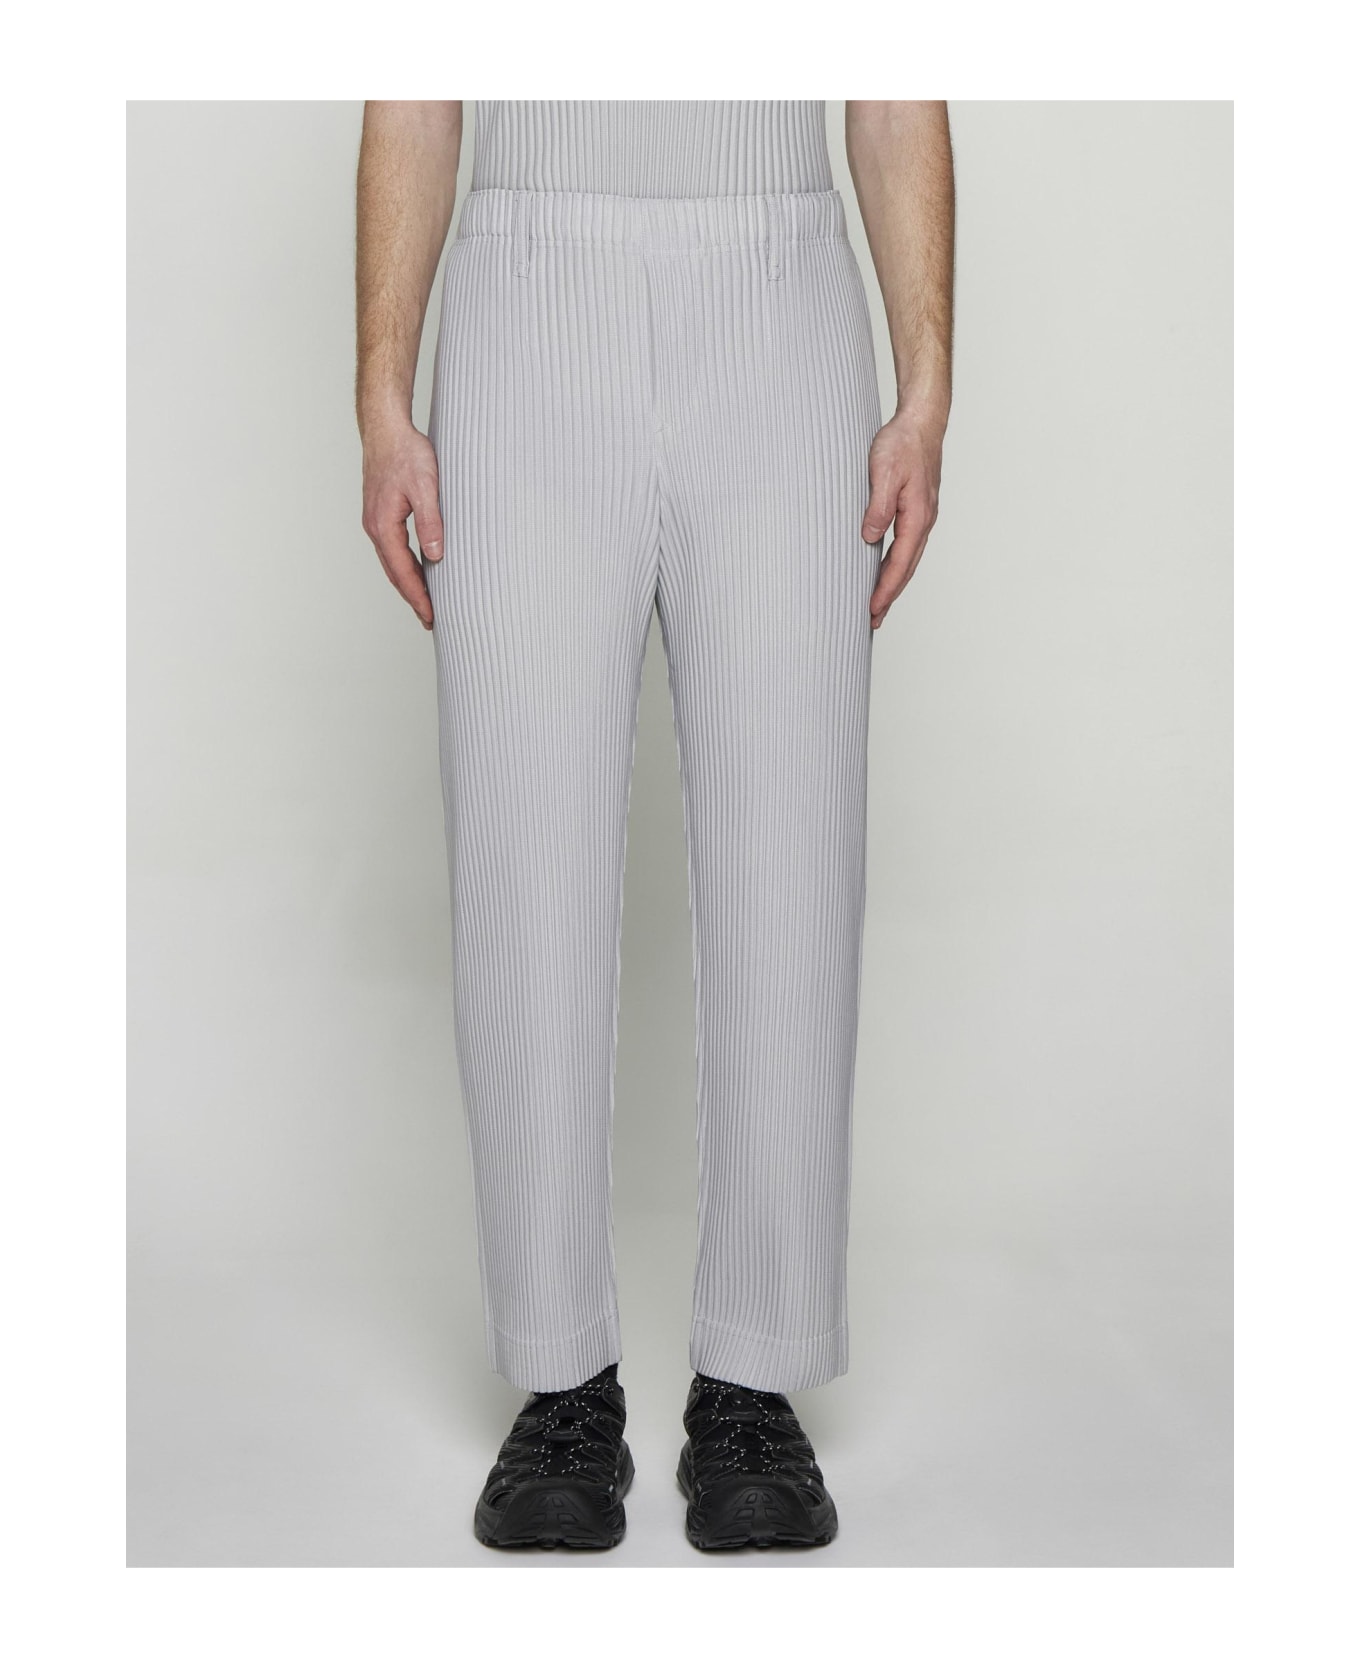 Homme Plissé Issey Miyake Pleated Fabric Trousers - Light Grey